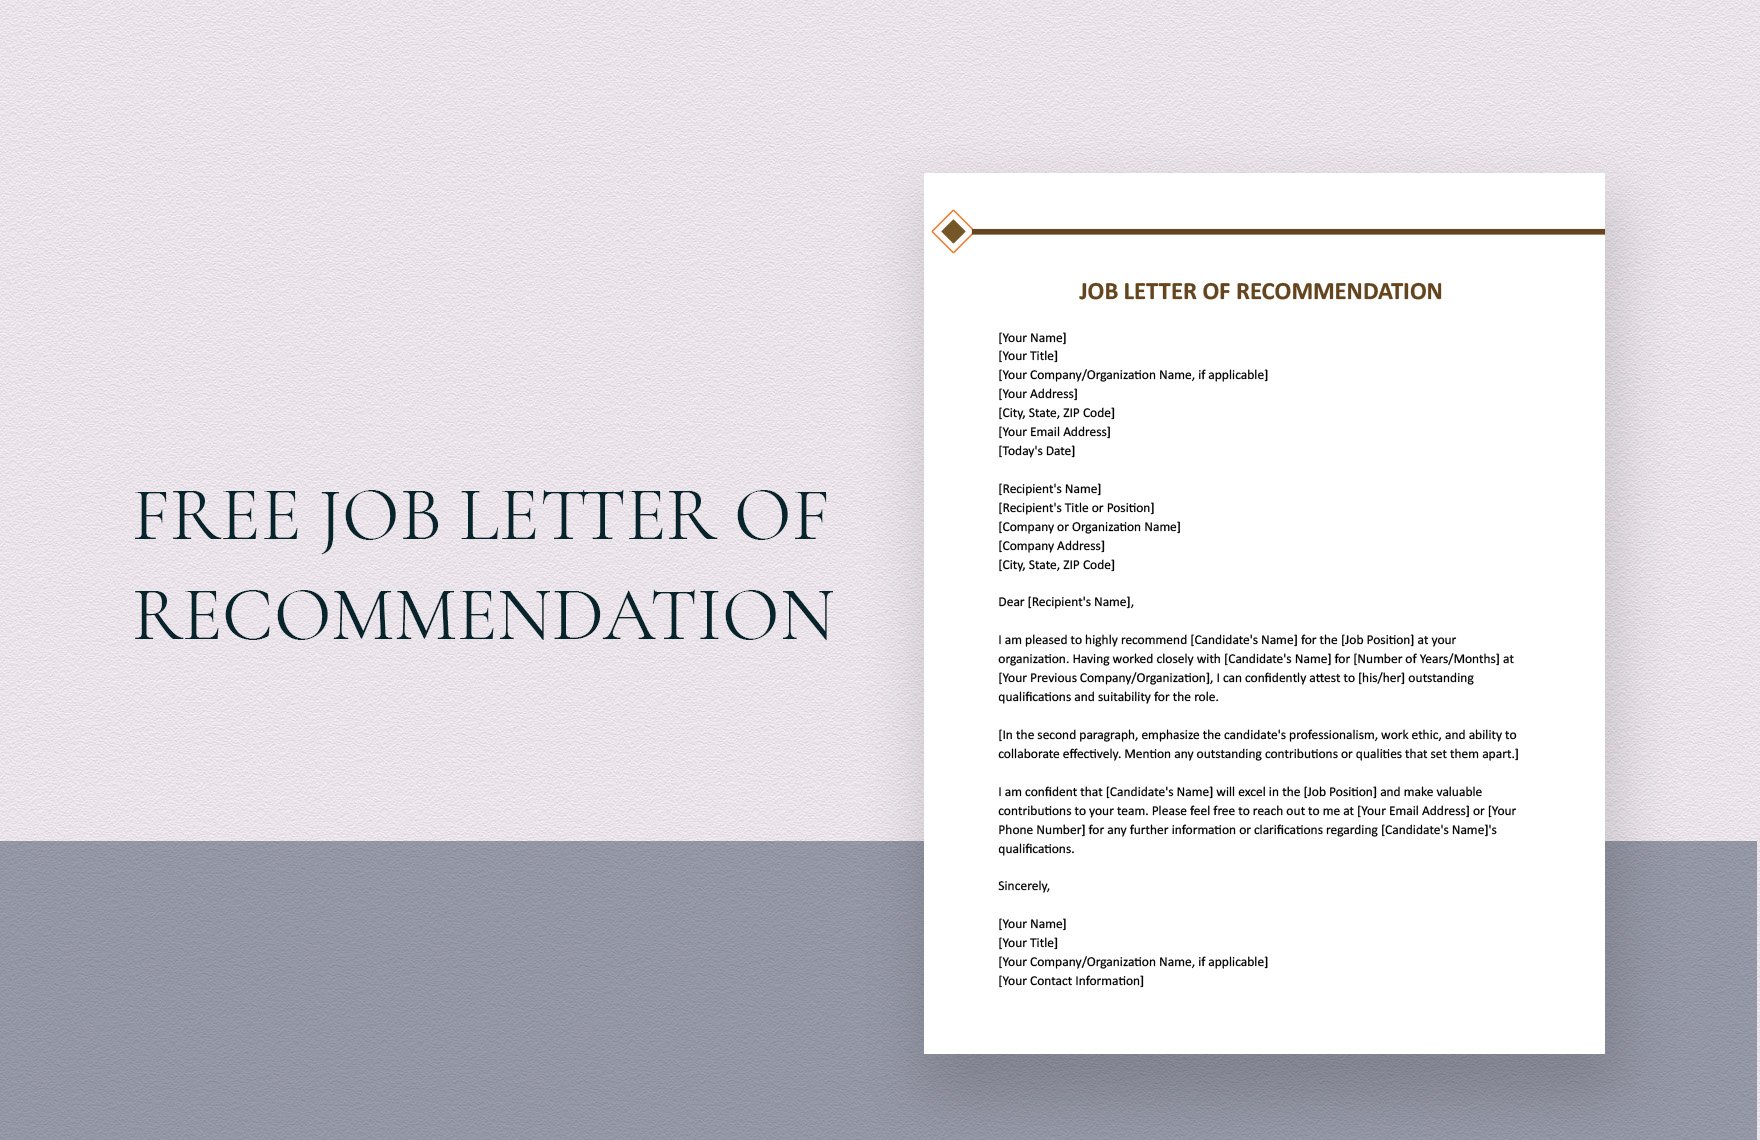 Job Letter Of Recommendation